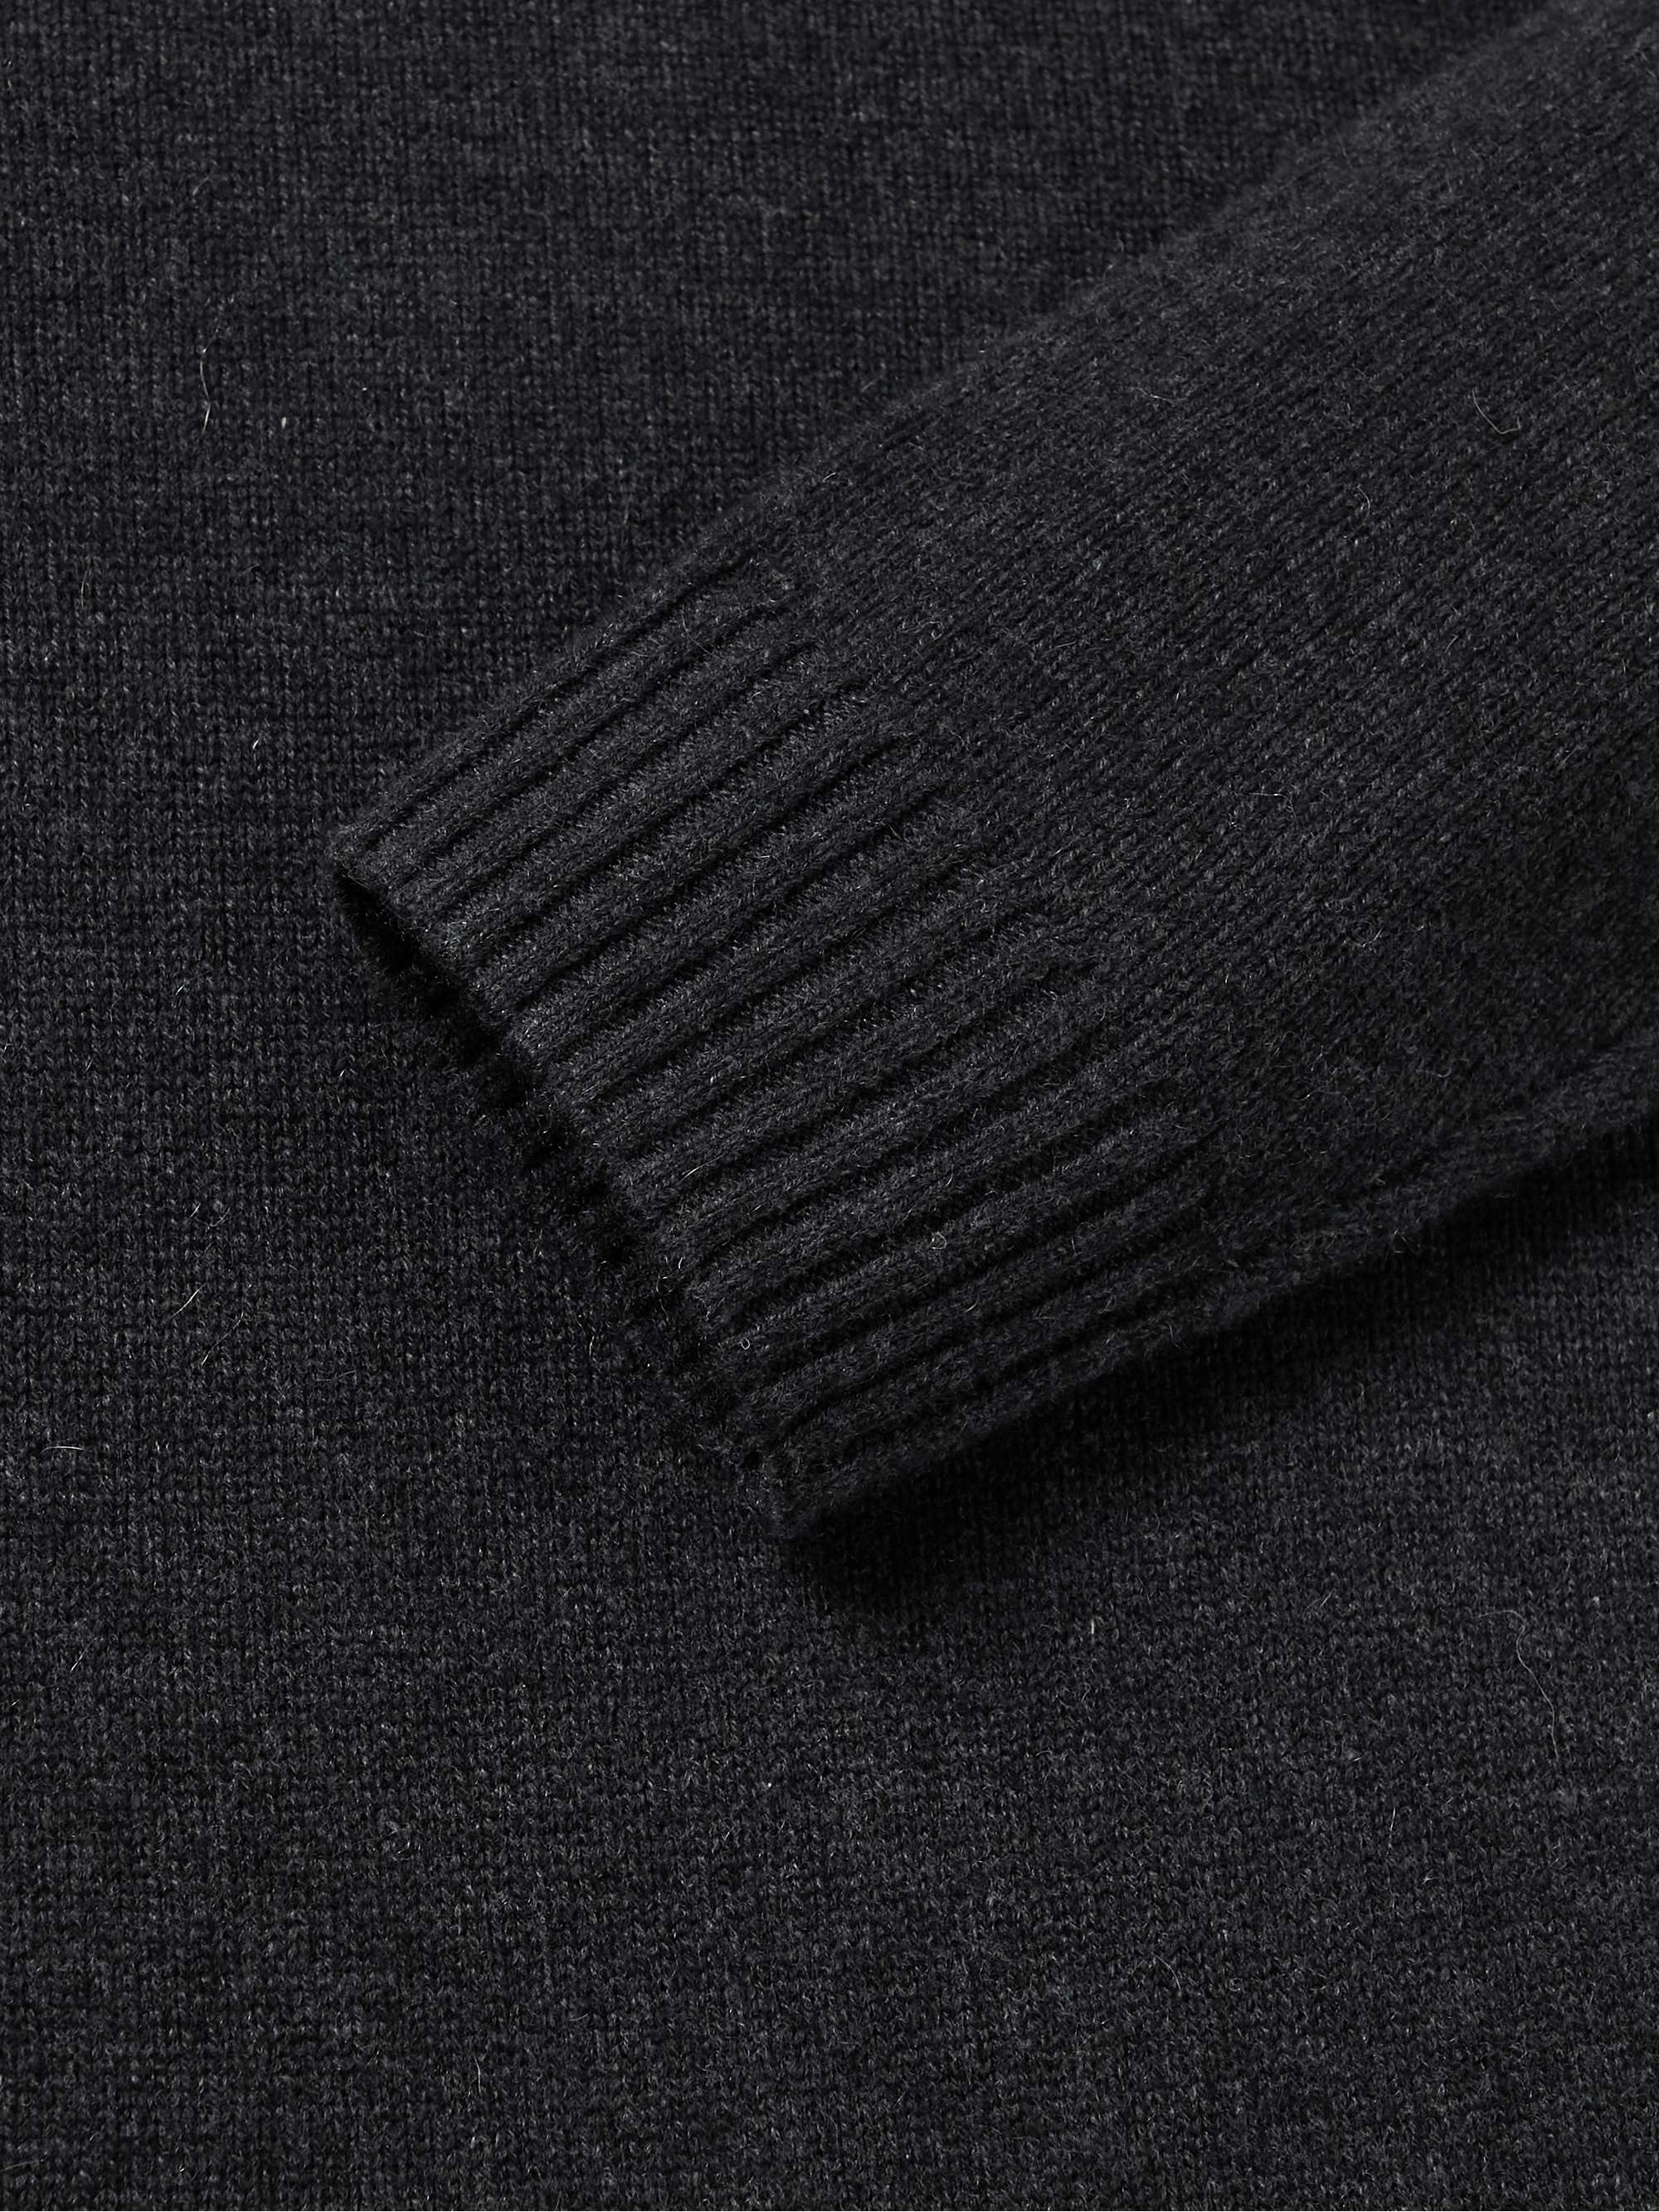 JAMES PERSE Saddle Recycled-Cashmere Half-Zip Sweater